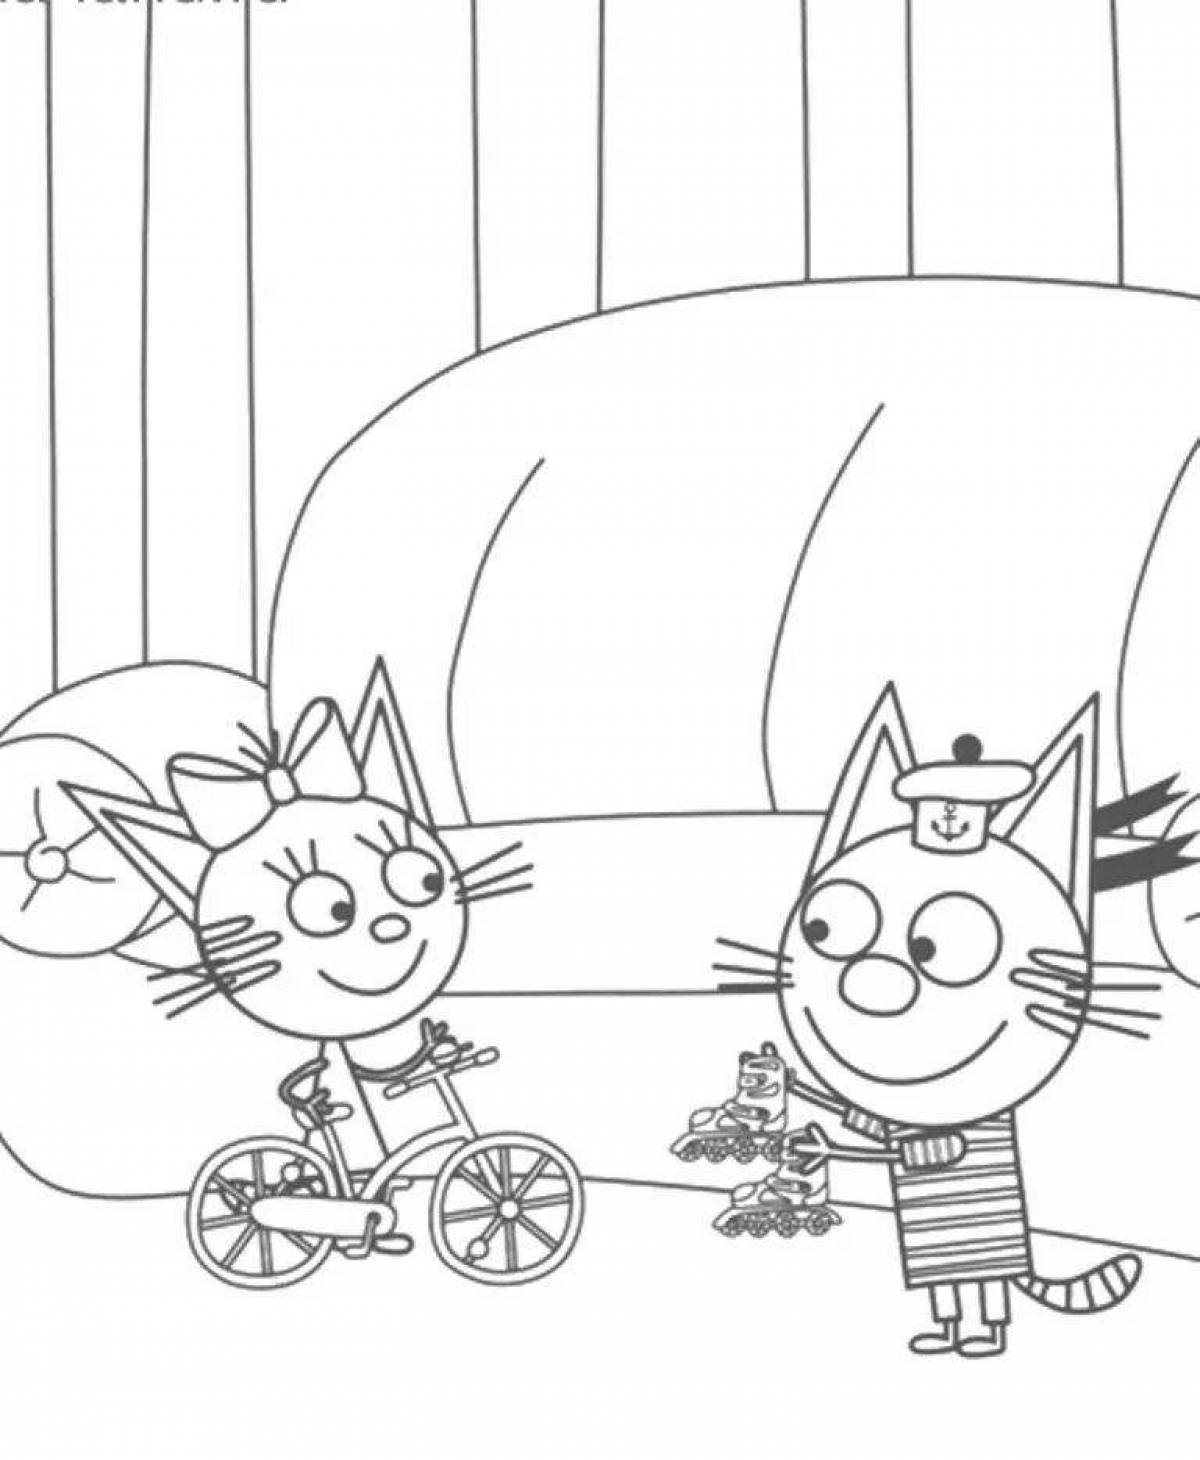 Coloring book funny mustard three cats